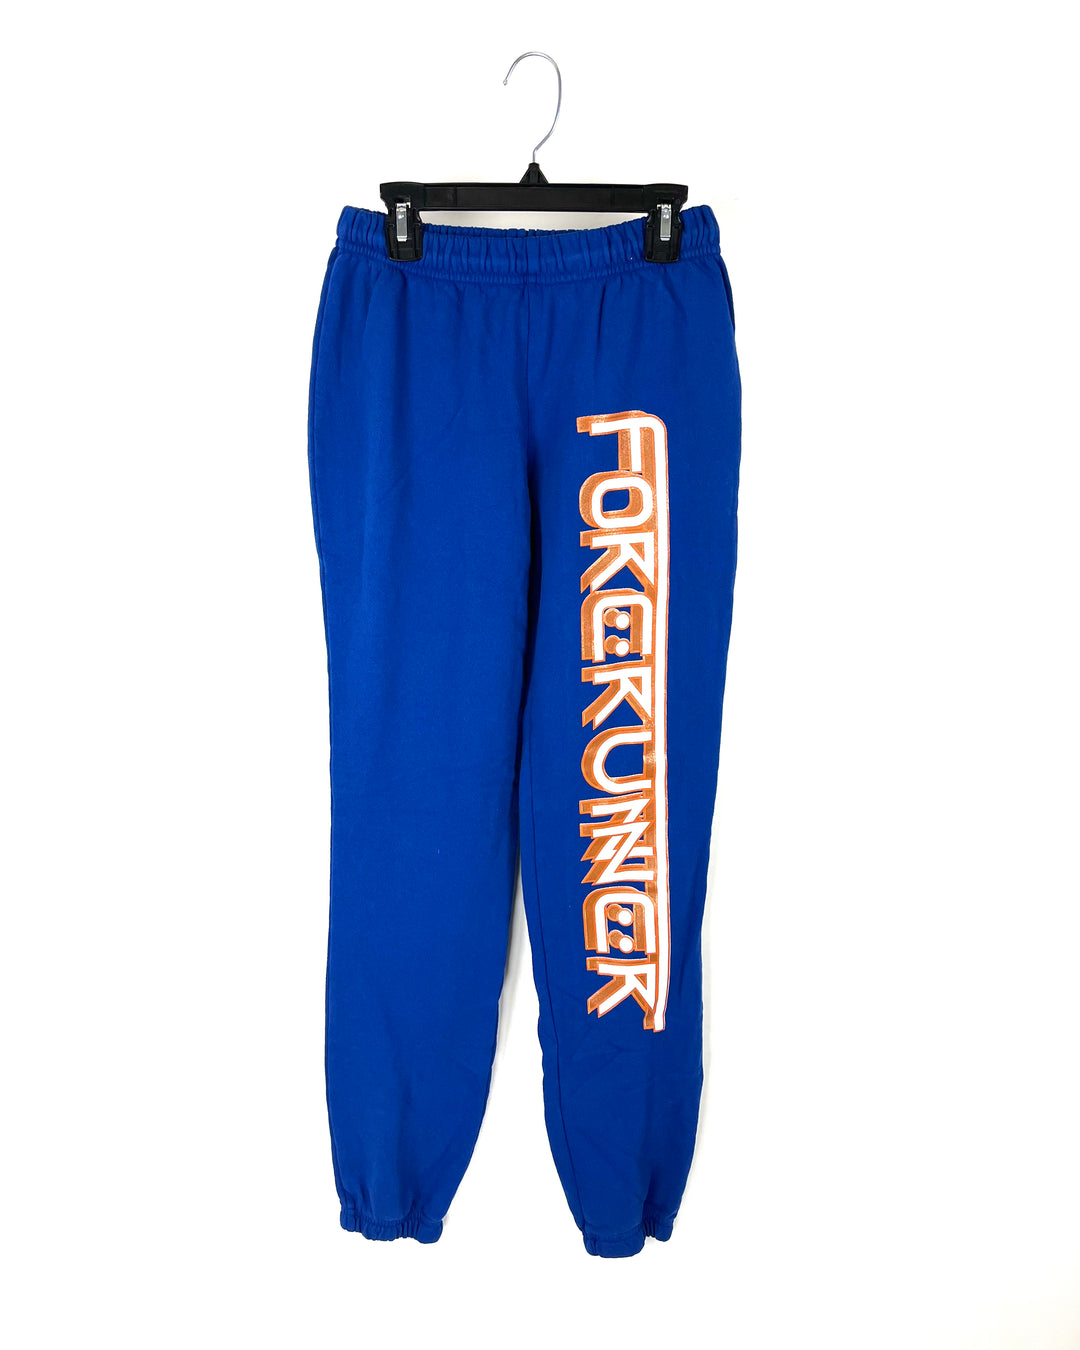 Dark Blue Sweatpants - Extra Small and Small